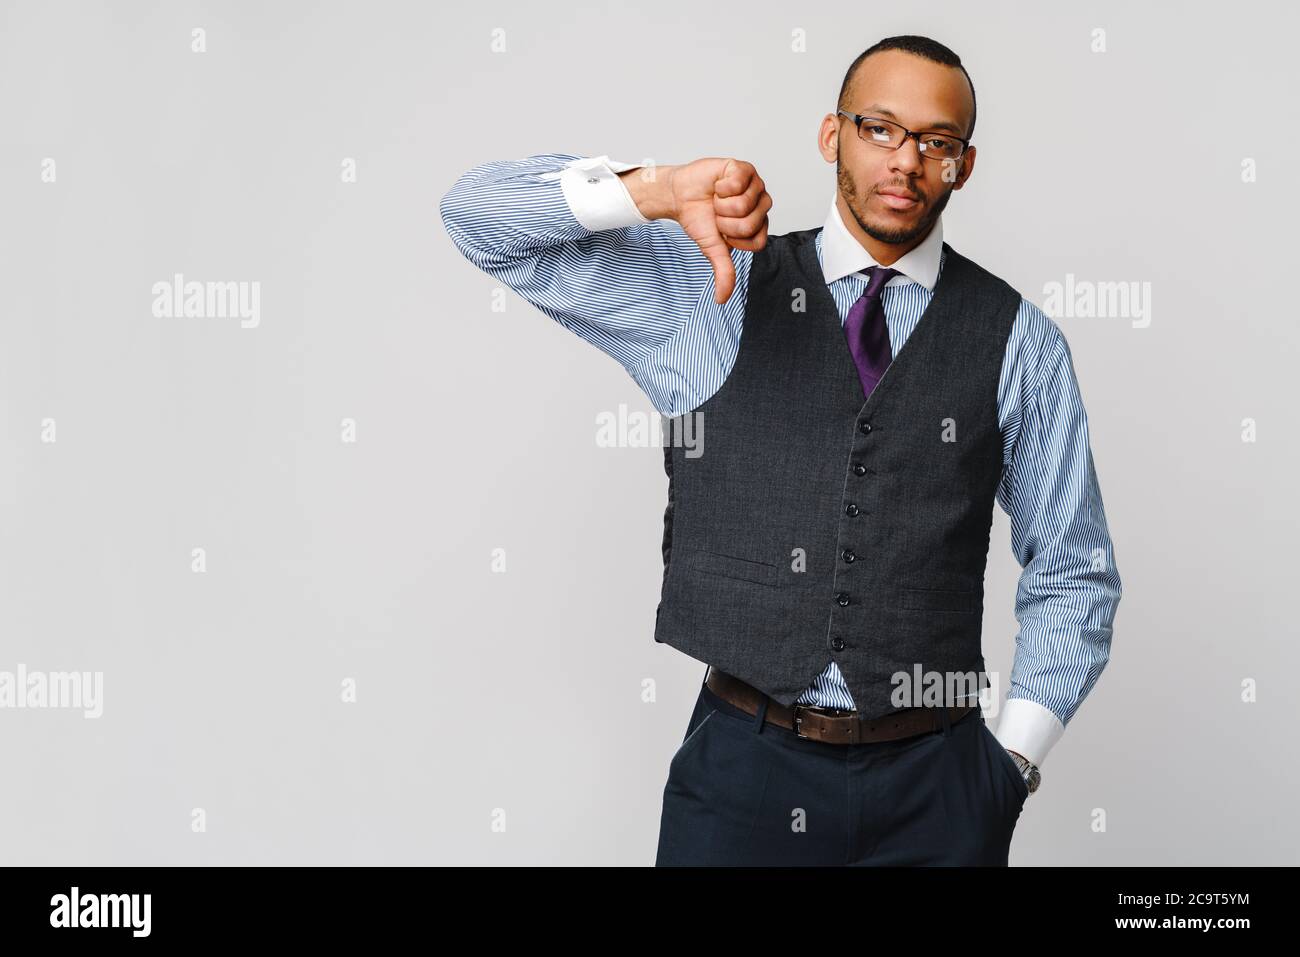 young black businessman with a dissenting serious dislike expression with thumbs down in disapproval Stock Photo